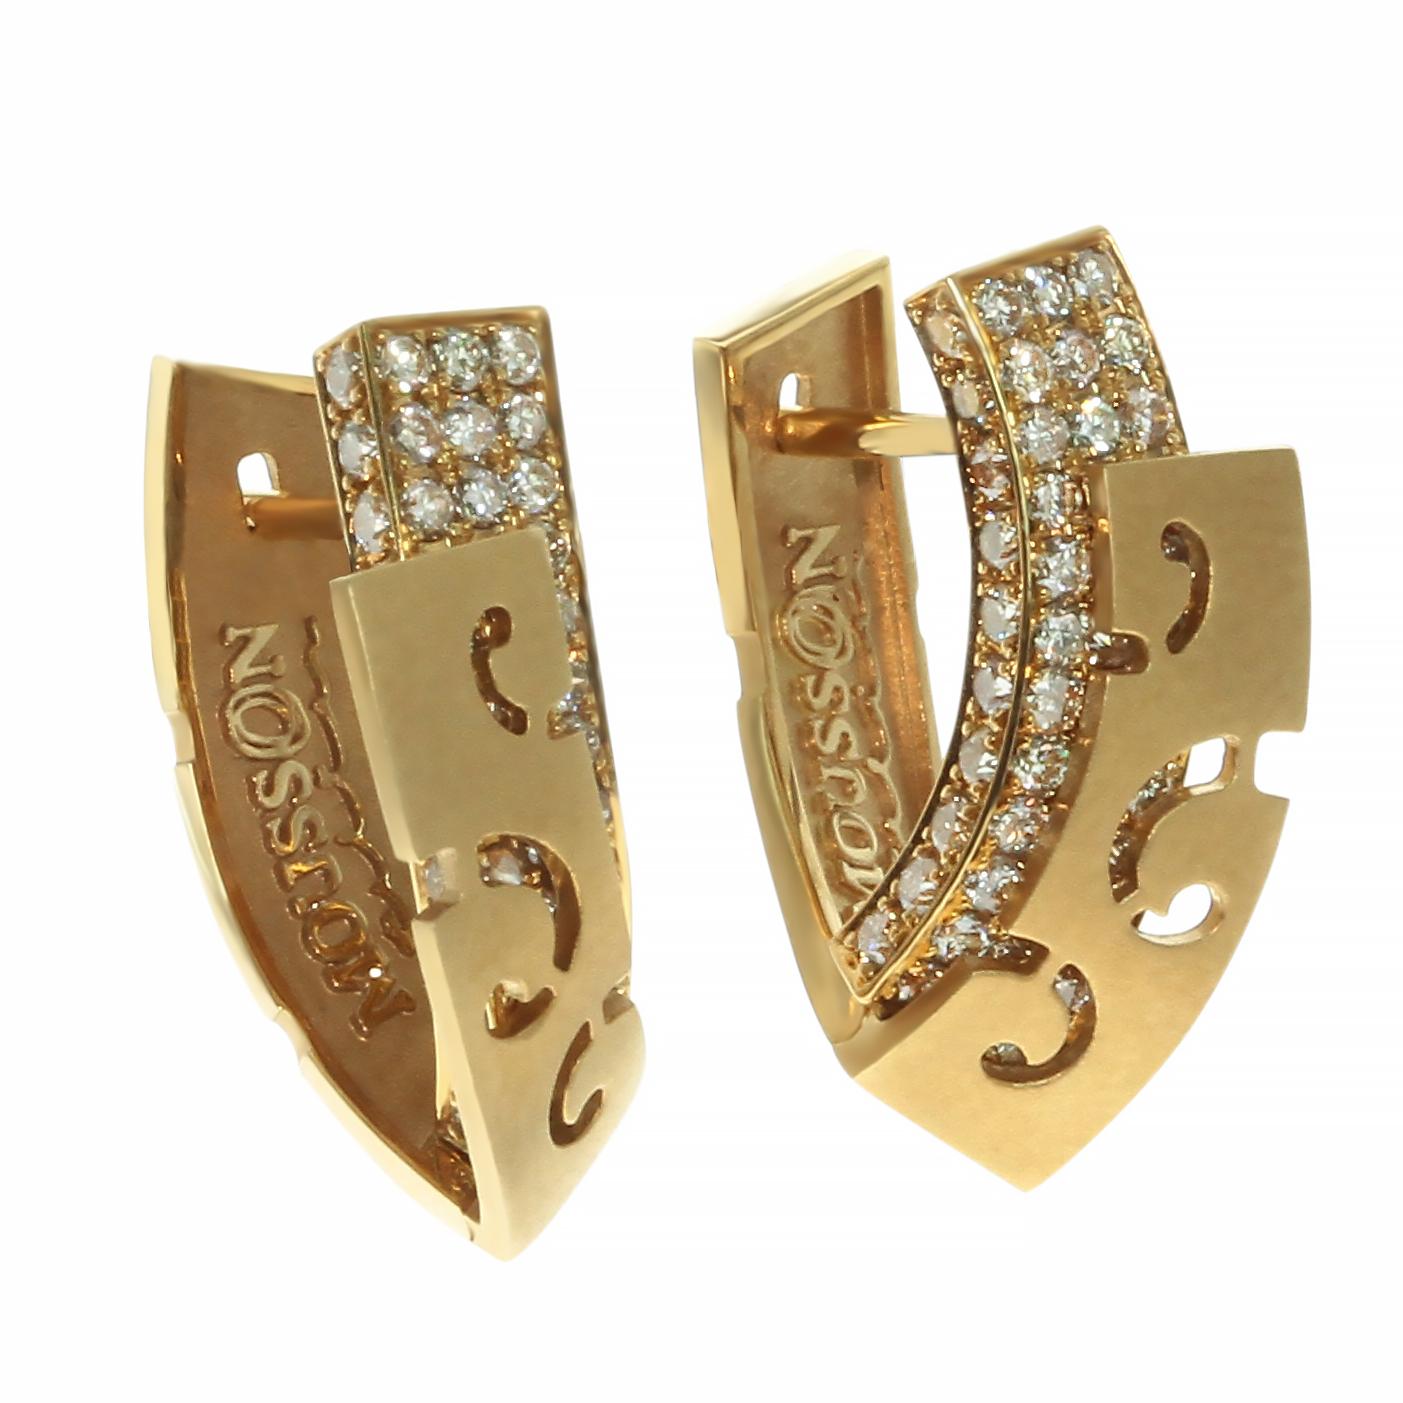 Brown Diamonds 18 Karat Yellow Gold Veil Earrings

This earrings hide all the secrets under the Veil. Please check the beauty of the almost 1.5 carat of Champagne diamonds carefully blended with the Yellow Gold.
Request the video link to check the